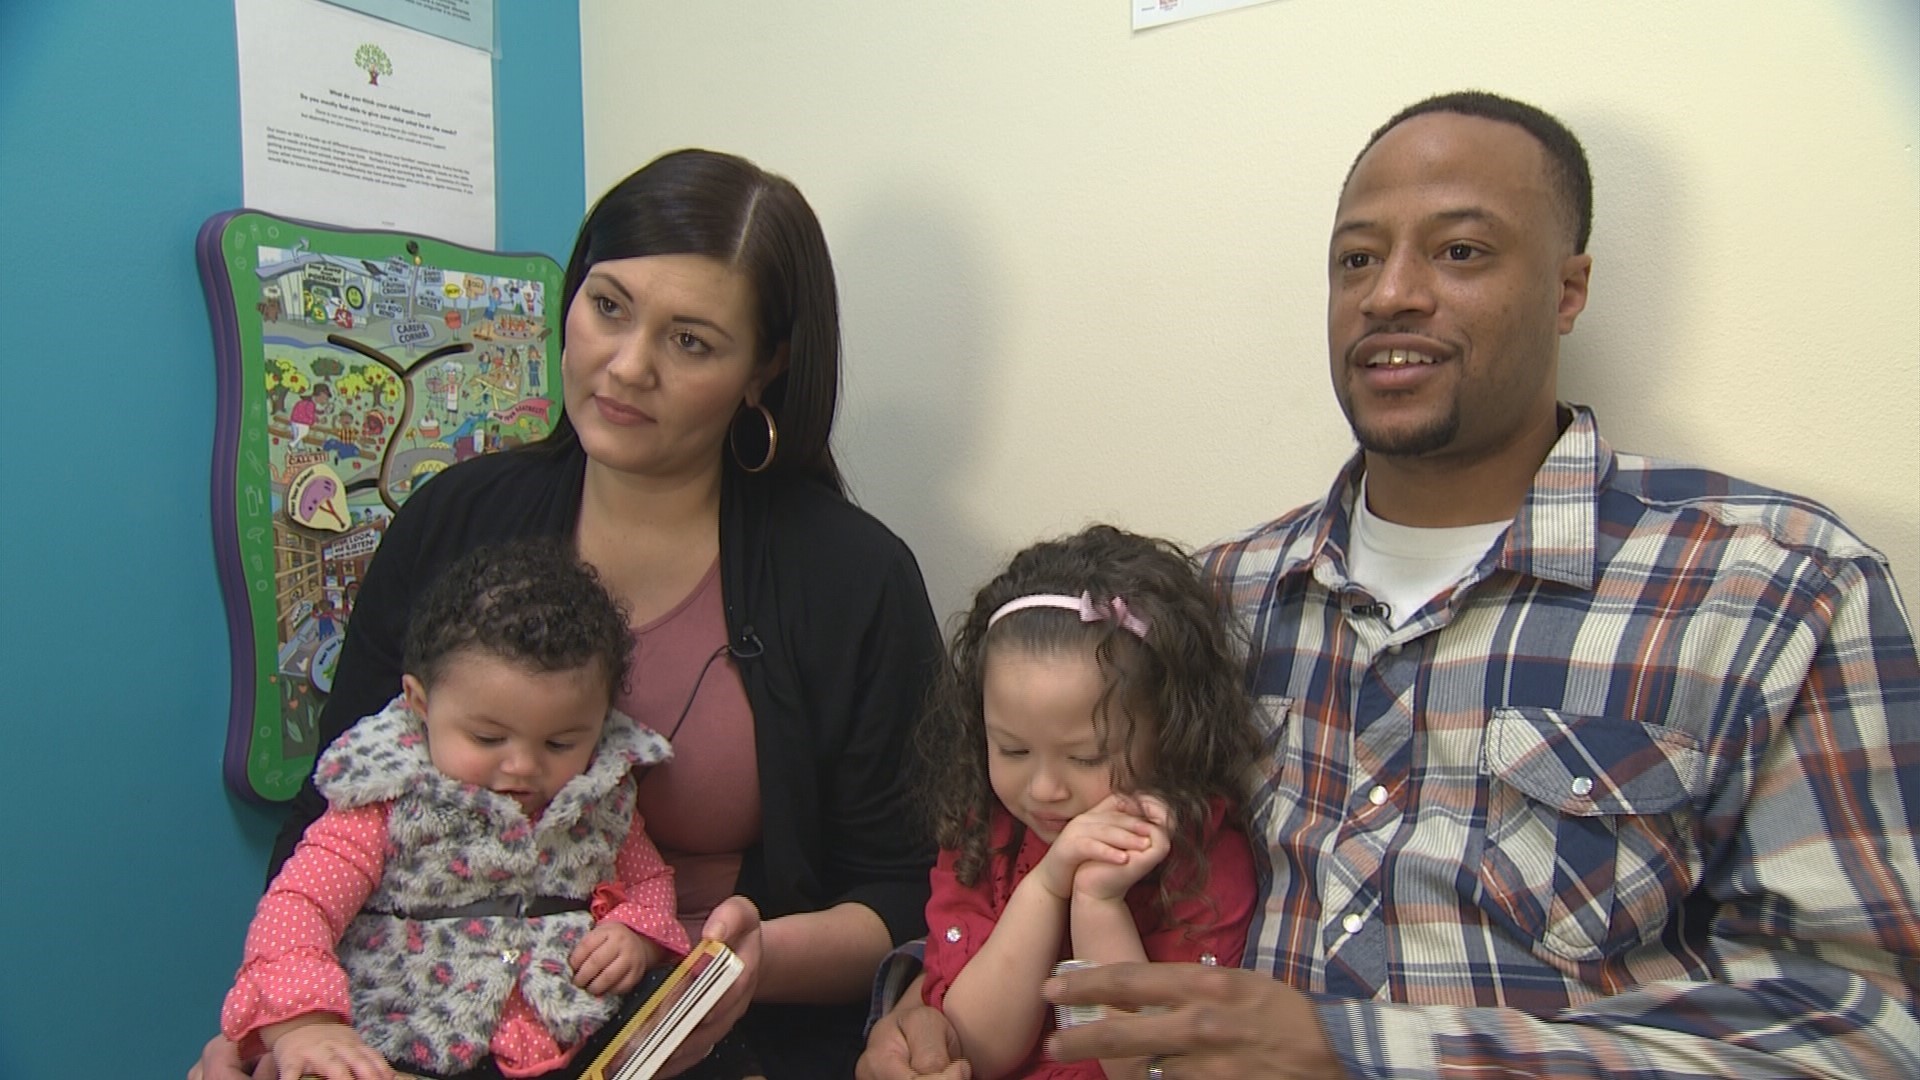 The non-profit provides care for kids from birth to age 21, regardless of a family's ability to pay. This story is sponsored by Seattle Children's.